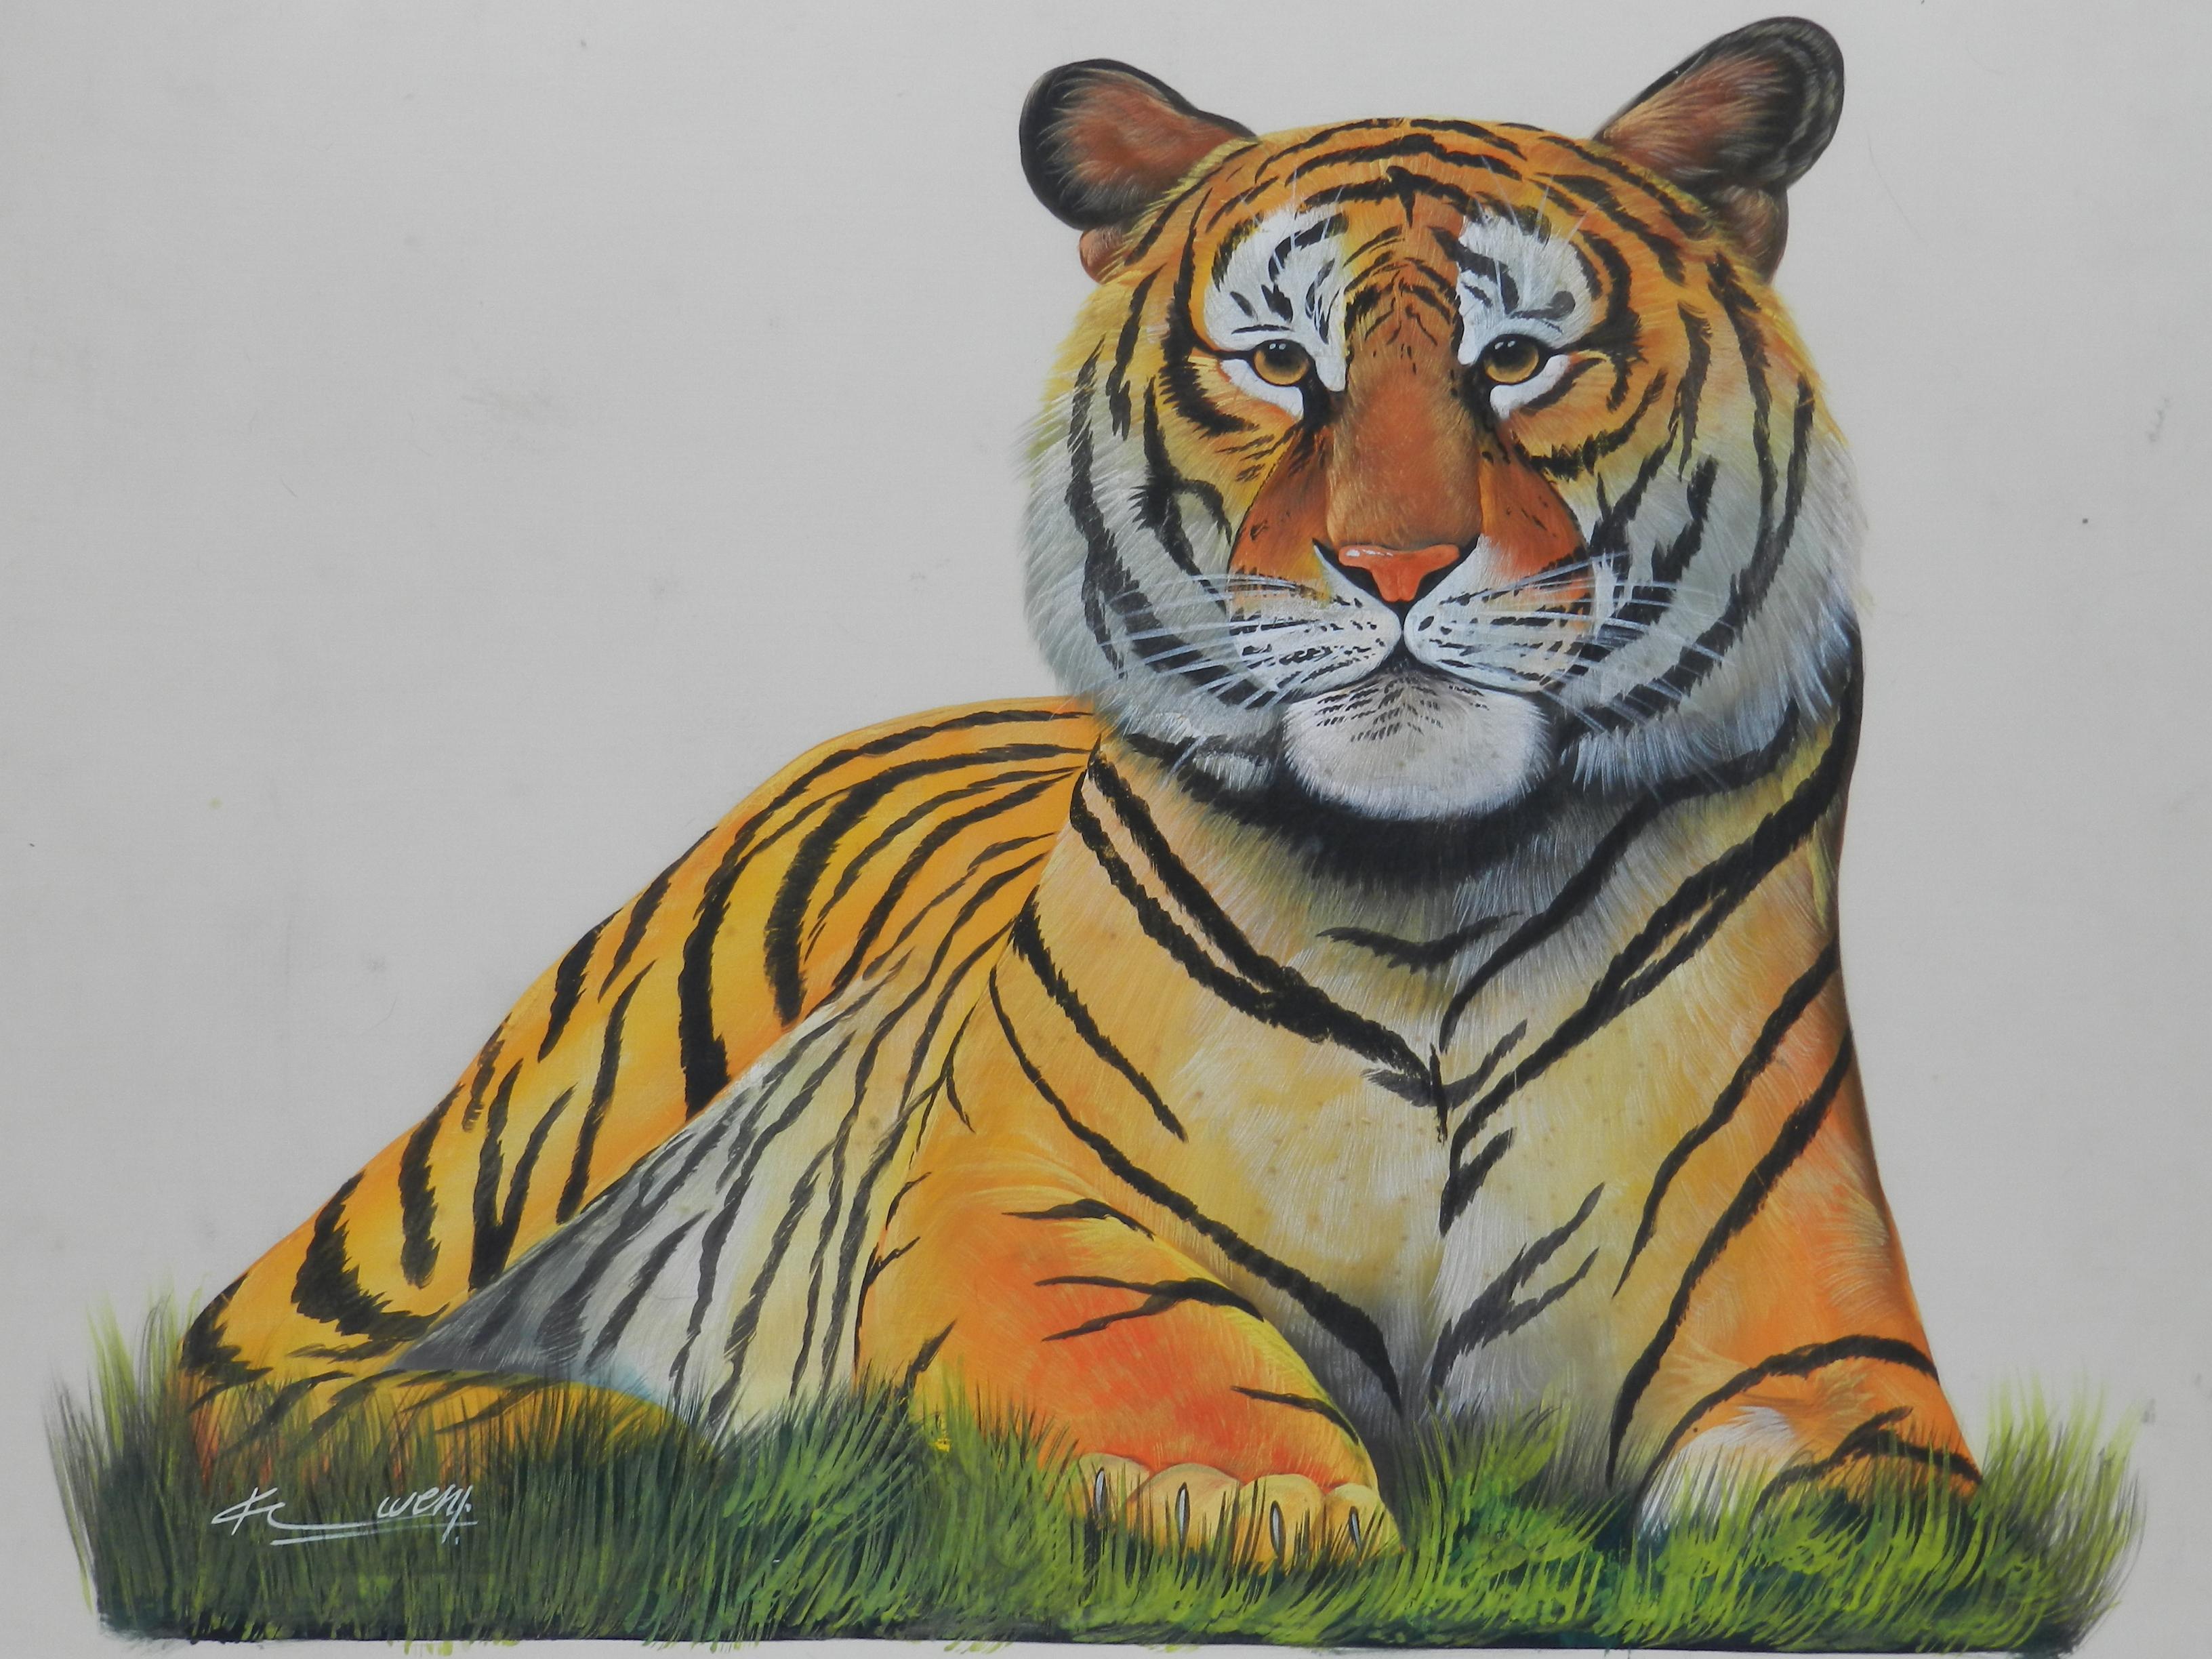 Details about   Artwork Tiger Grass Hand Painted Chinese Brush watercolor painting Wall art 